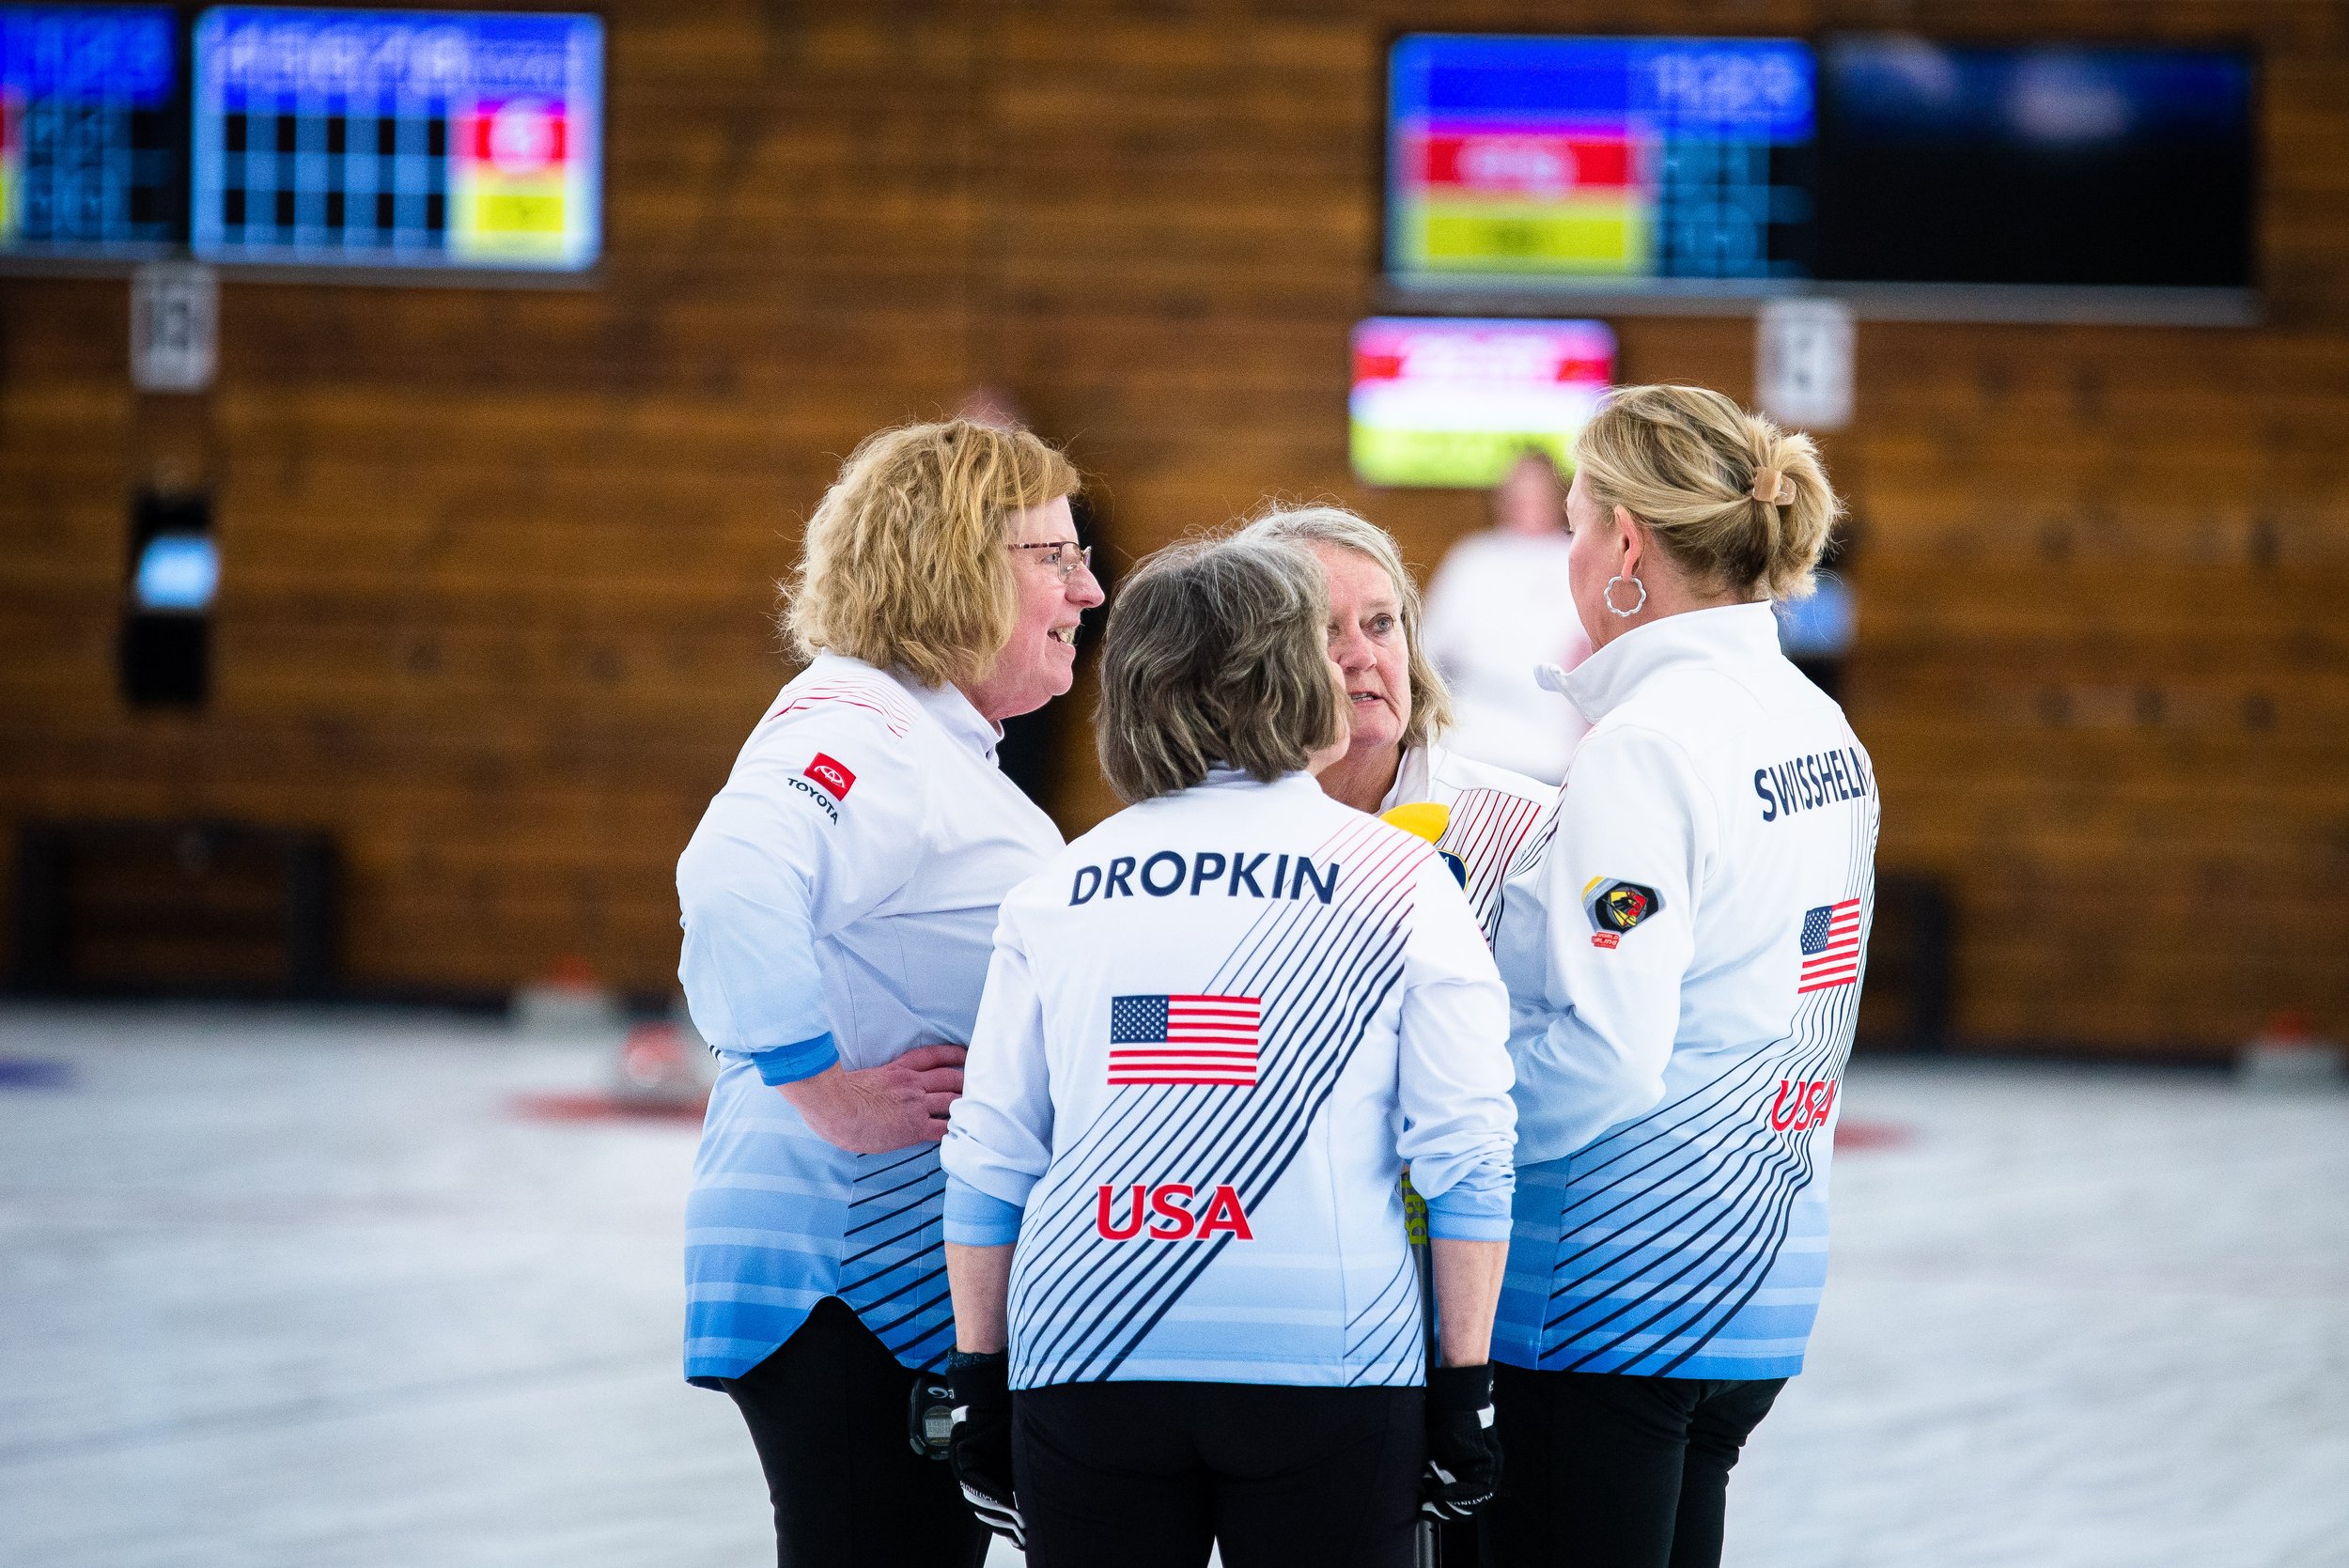 TEAM USA ADVANCE TO PLAYOFFS AT WORLD MEN'S CURING CHAMPIONSHIP 2022 — USA  CURLING